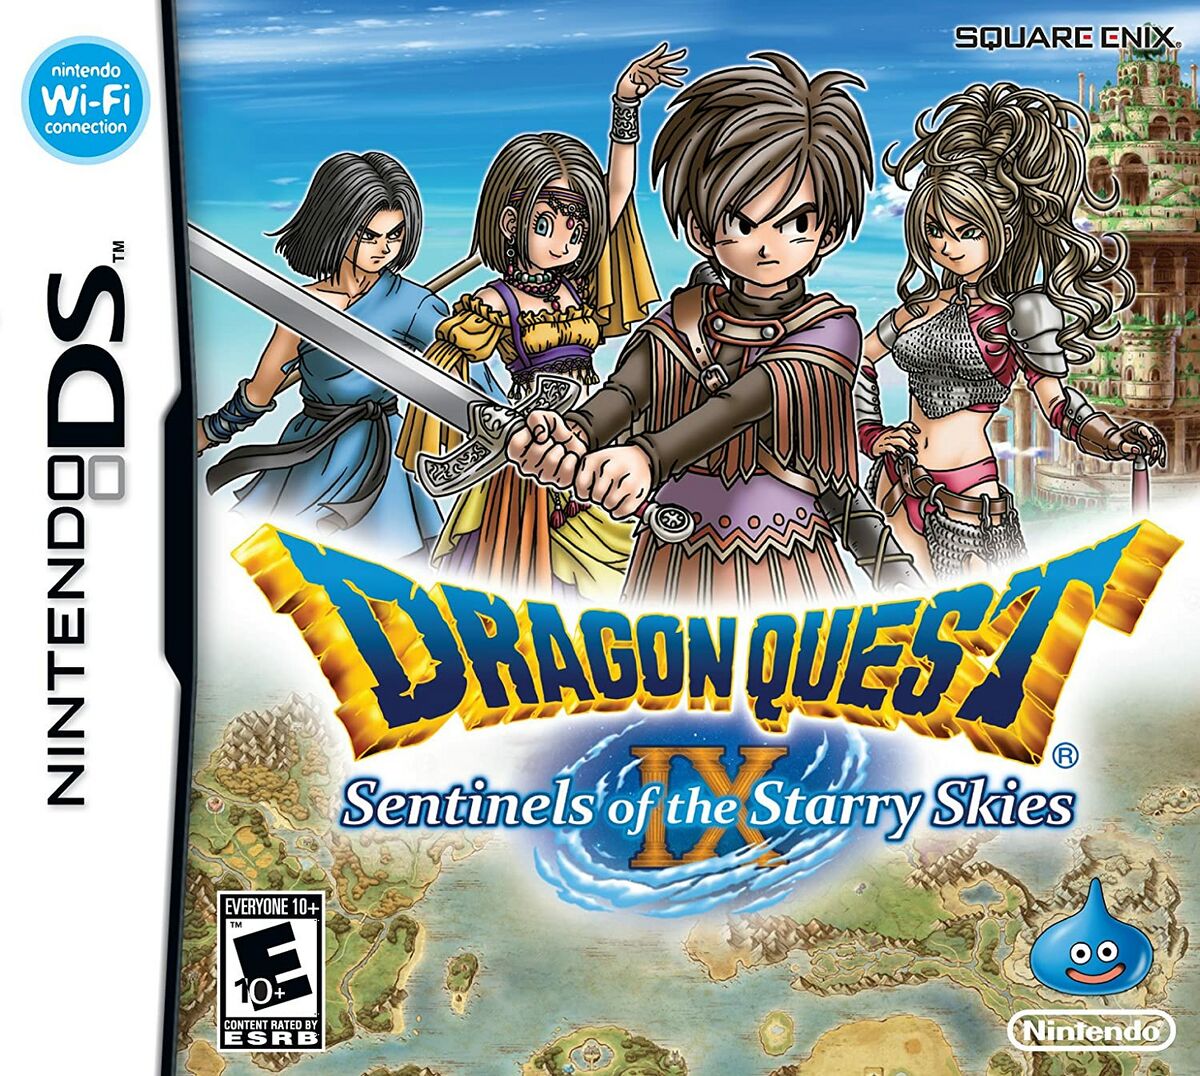 dragon-quest-ix-sentinels-of-the-starry-skies-strategywiki-strategy-guide-and-game